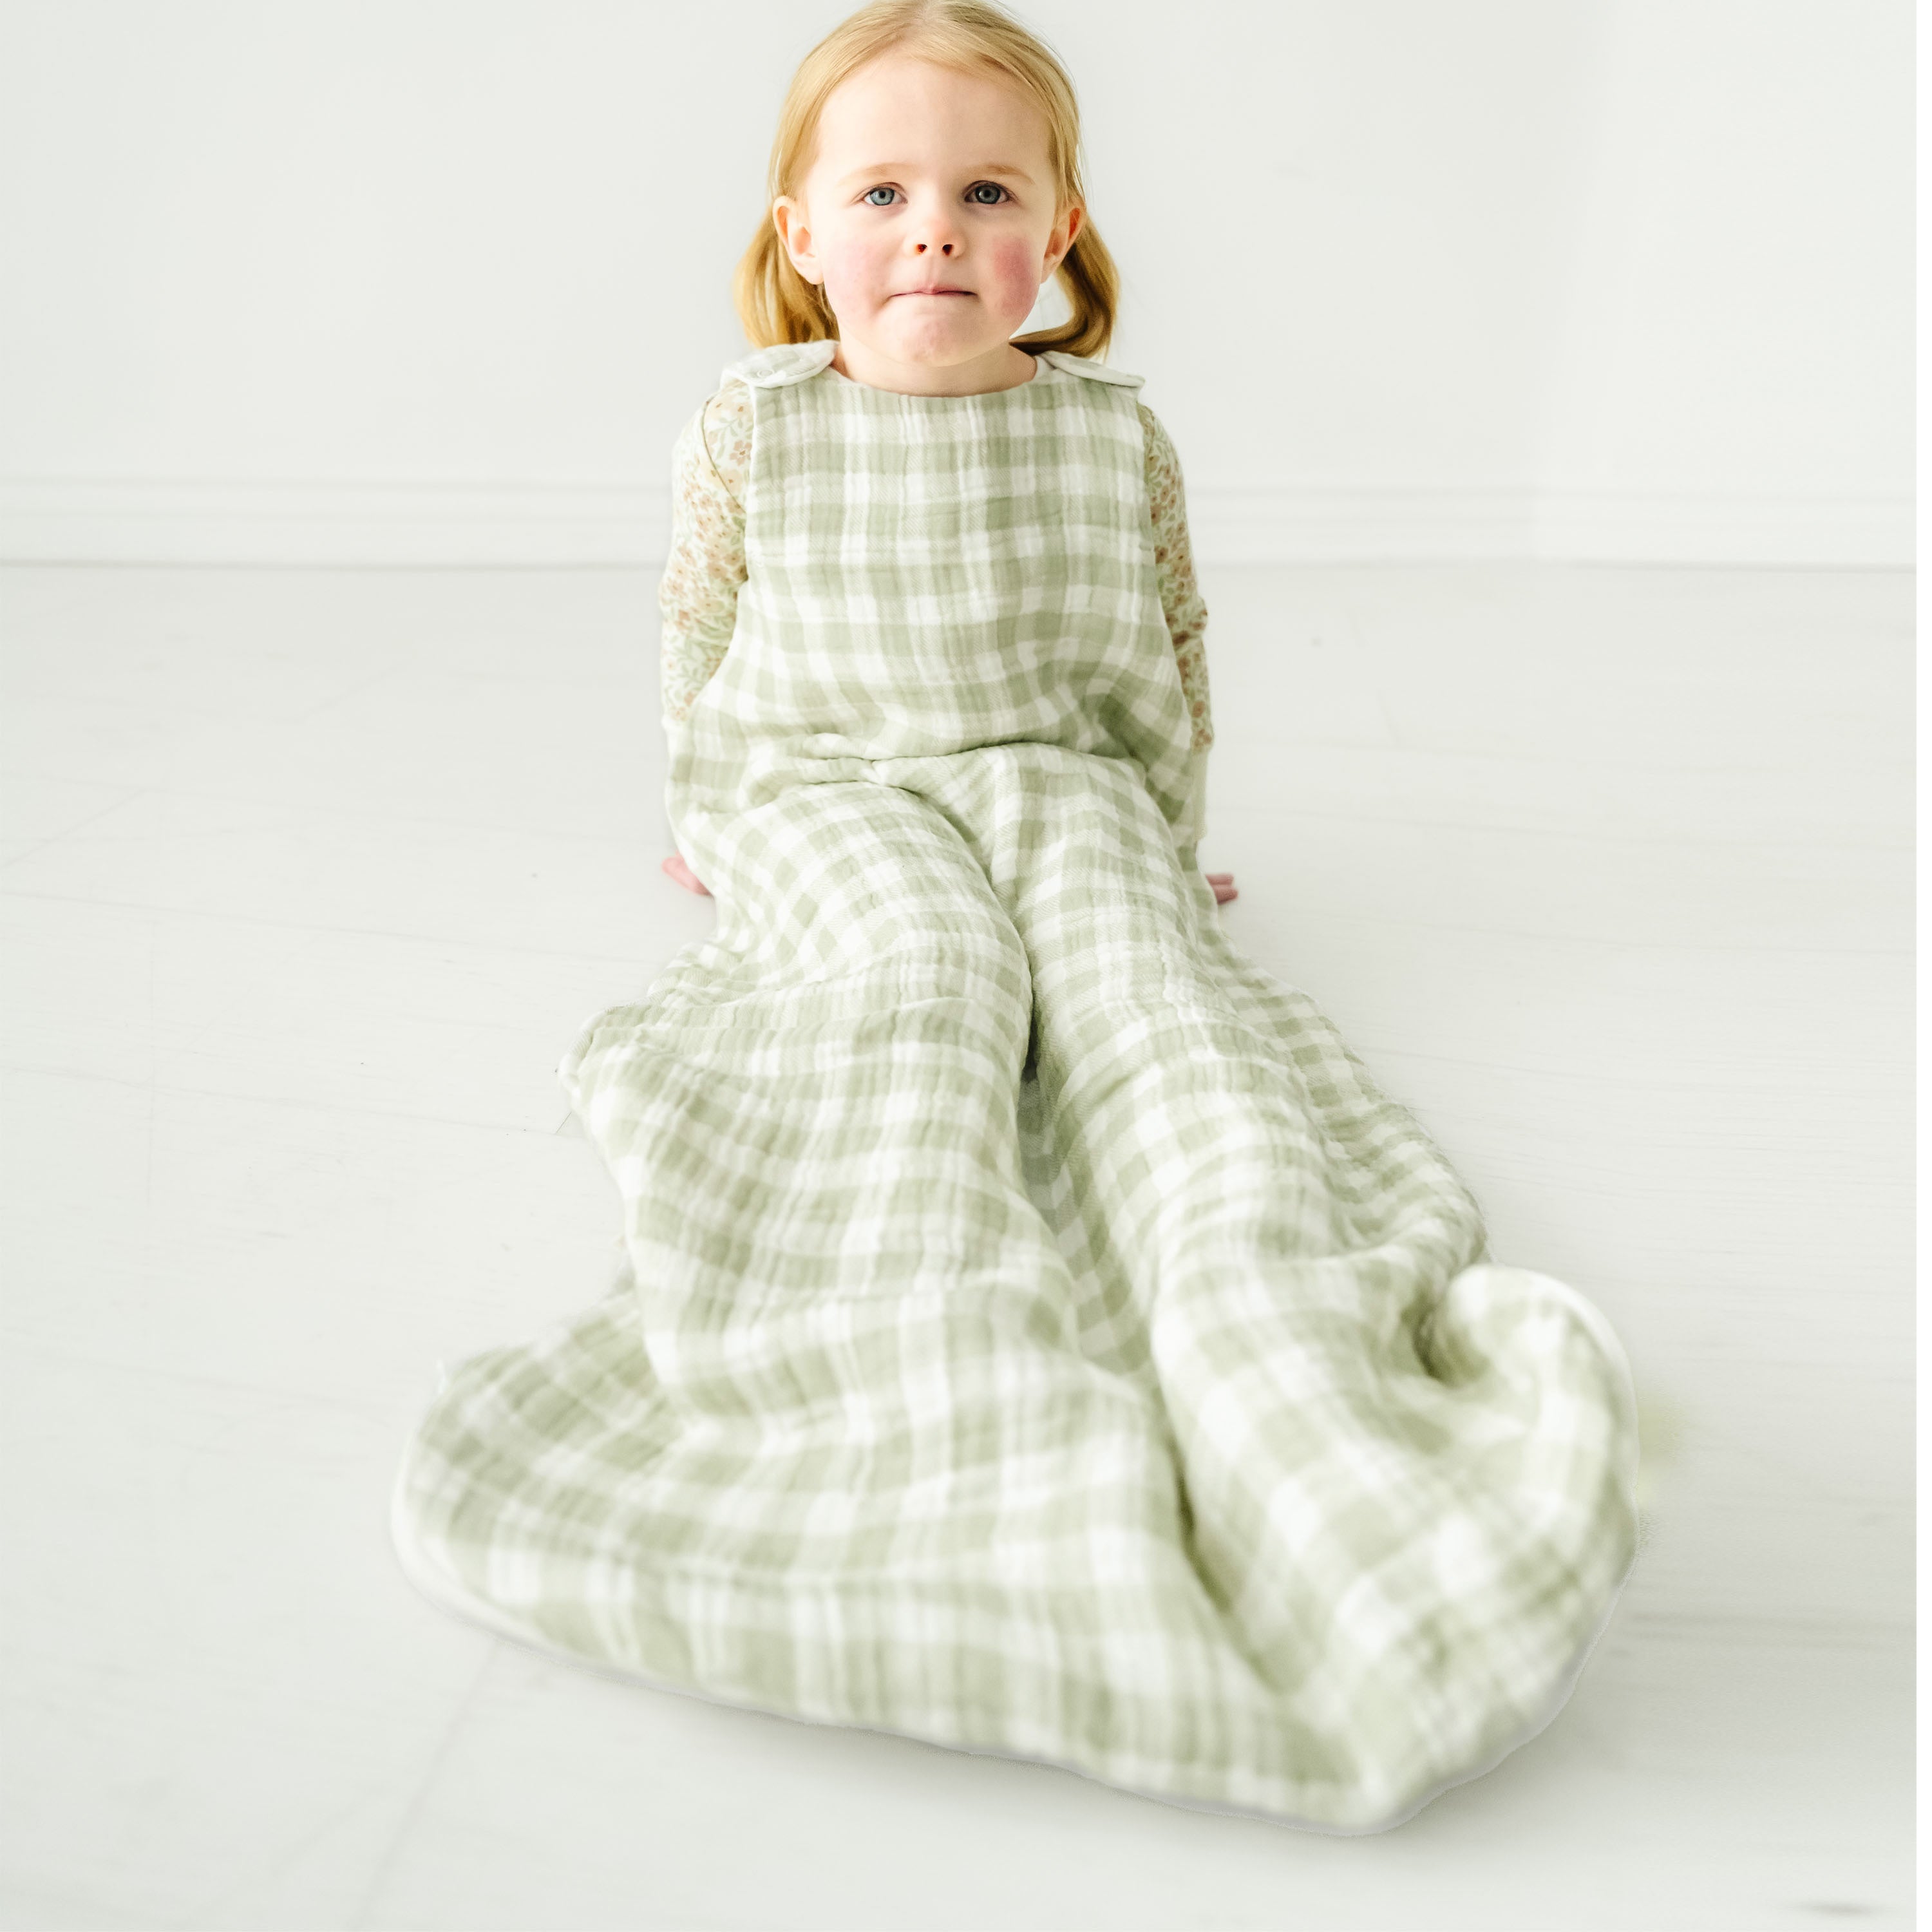 A young toddler with blonde hair sits on the floor wearing a Makemake Organics Muslin Wearable Blanket - Gingham. The child's expression is calm and gentle, against a soft white background.